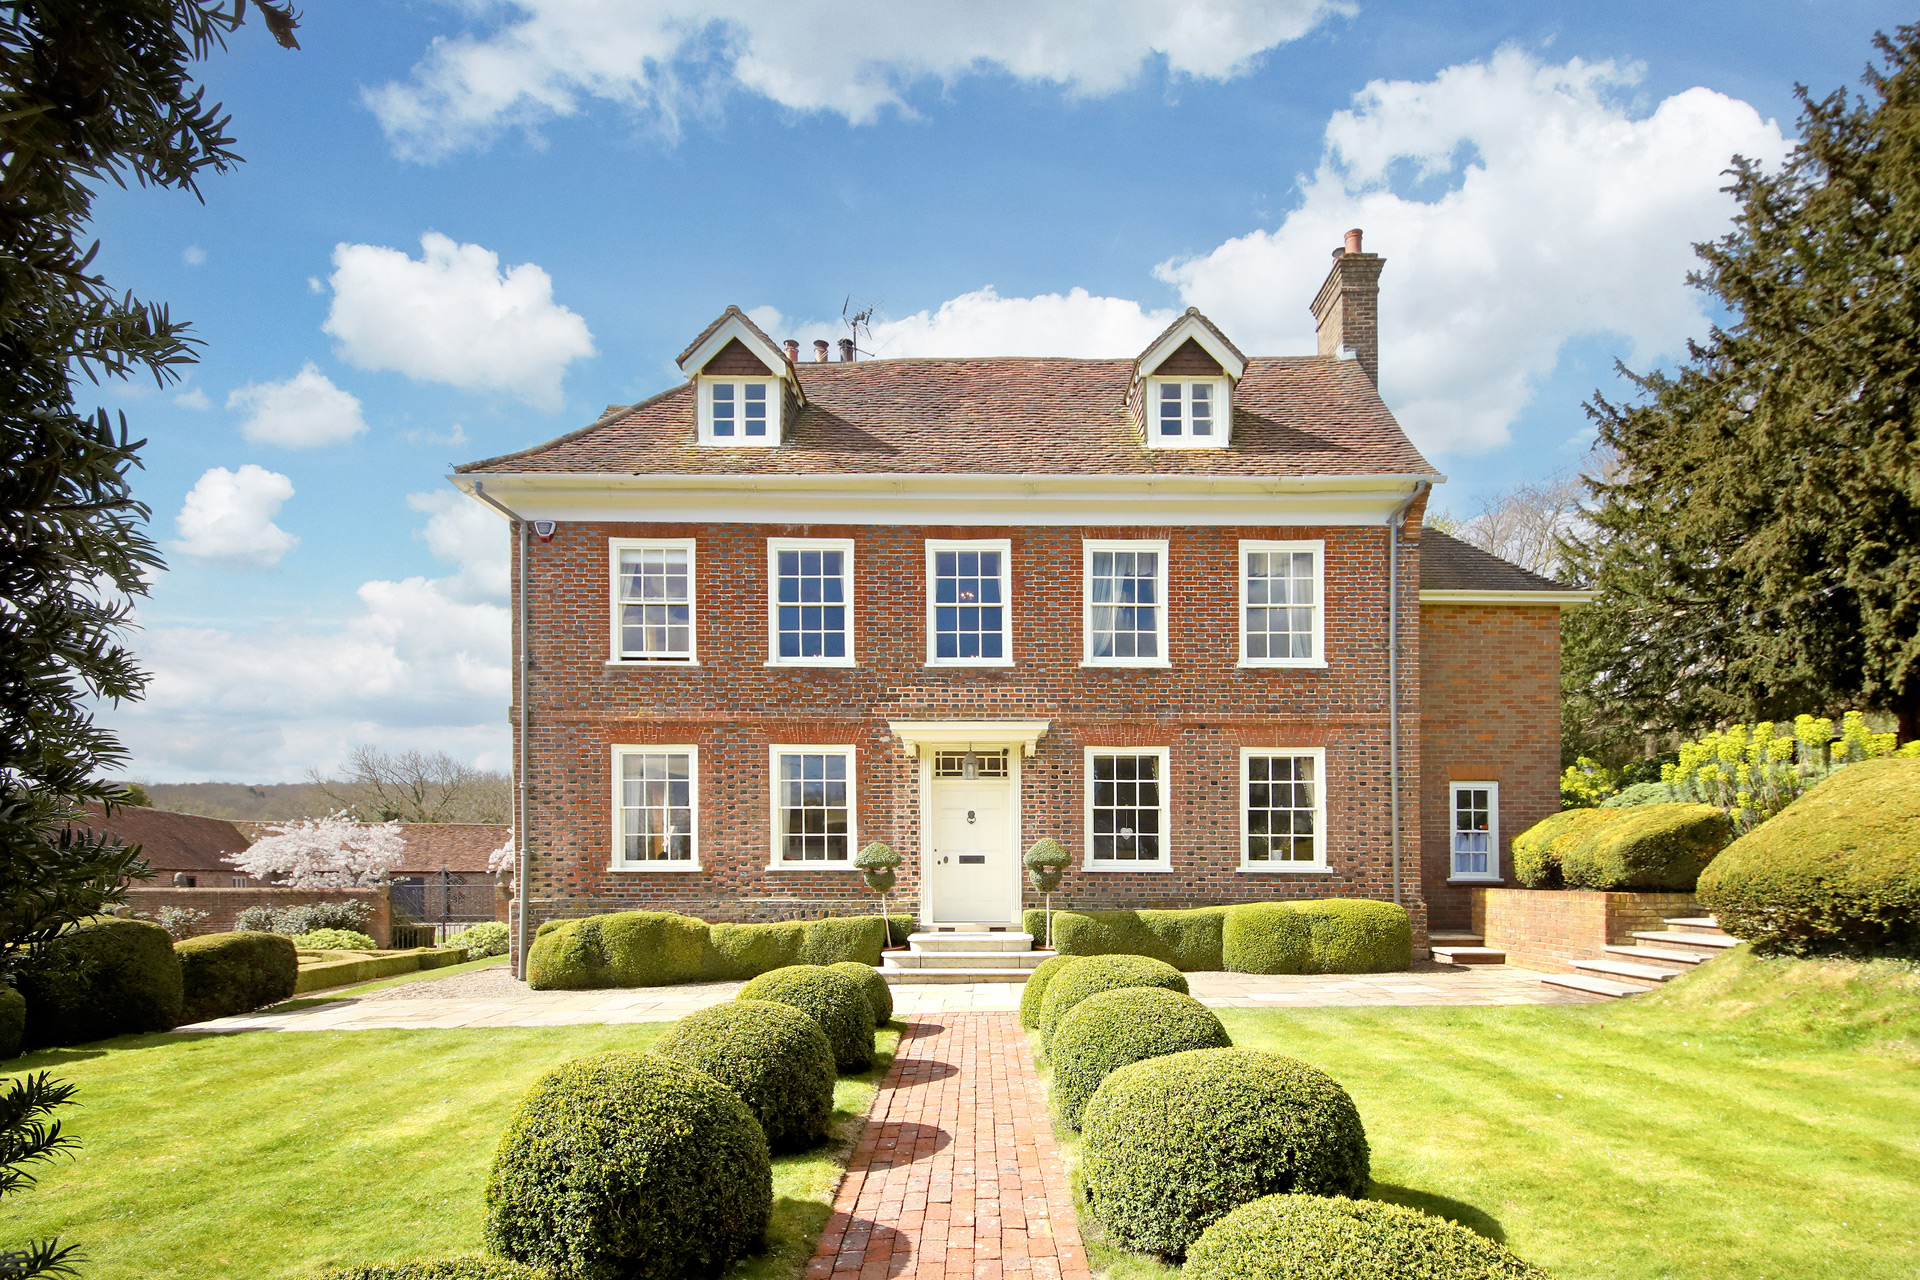 Red brick country manor with a hedge-lined path leading to the door.